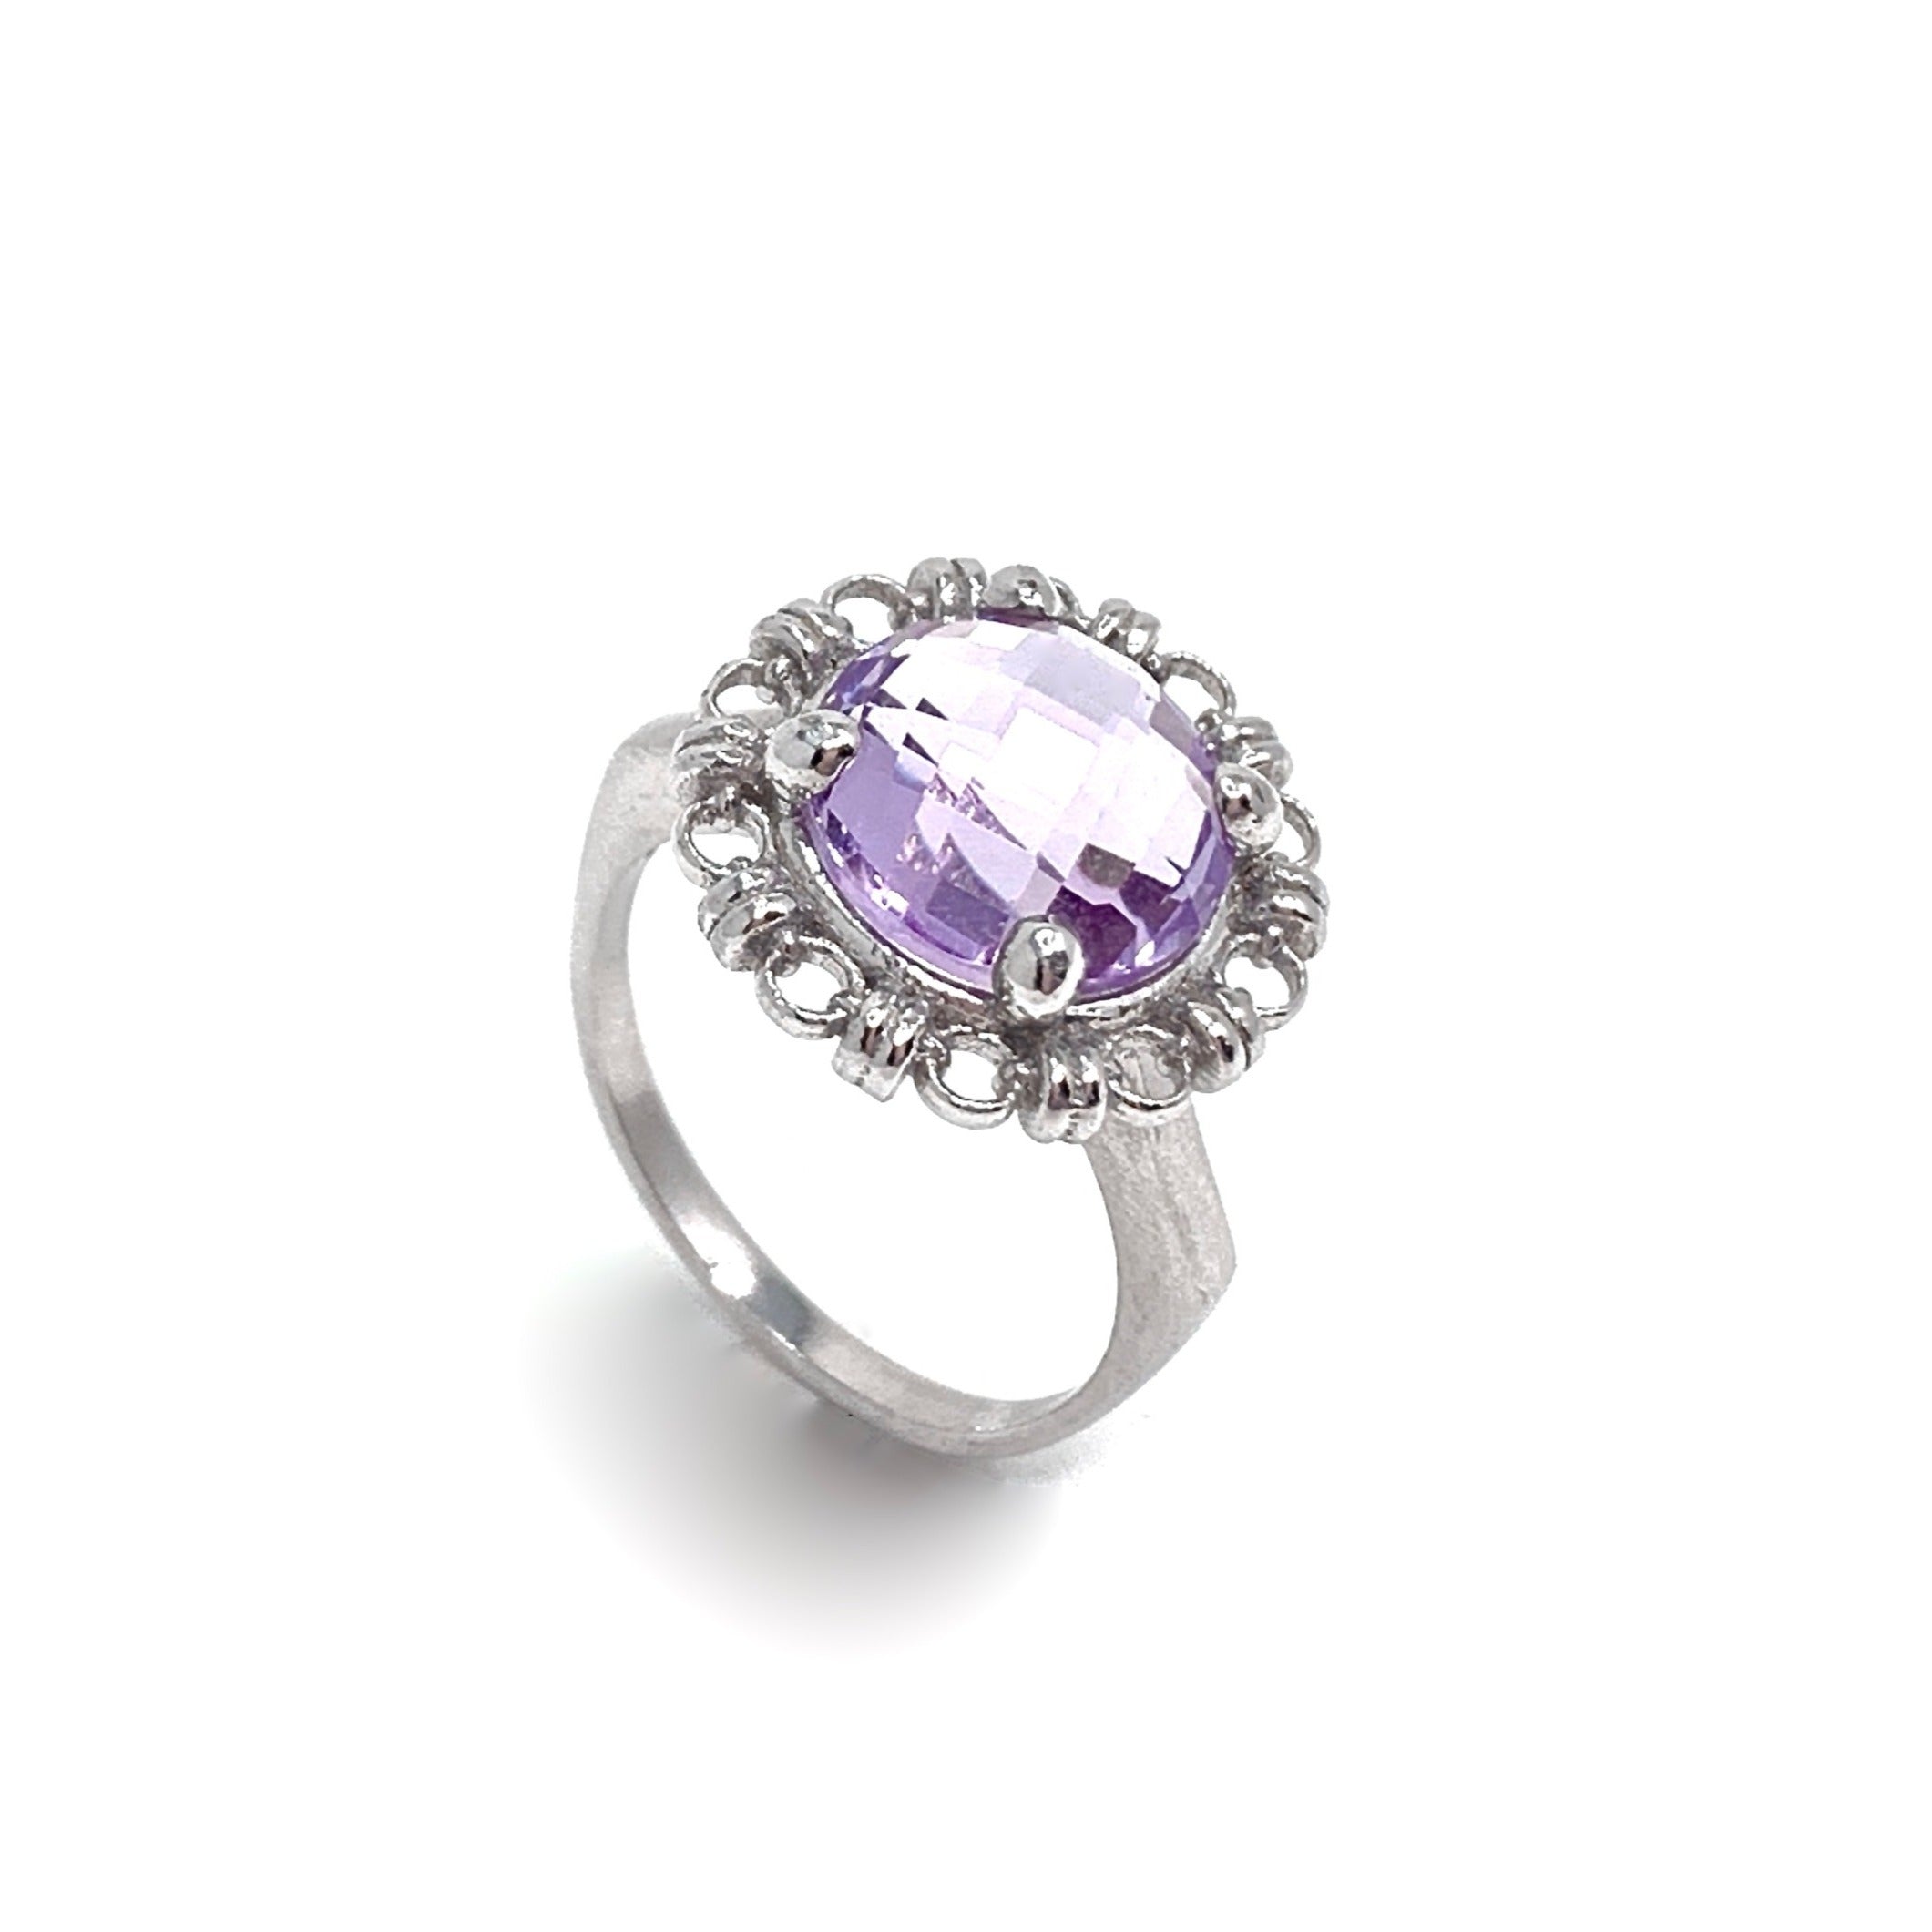 Filary Ring in Silver with Amethyst